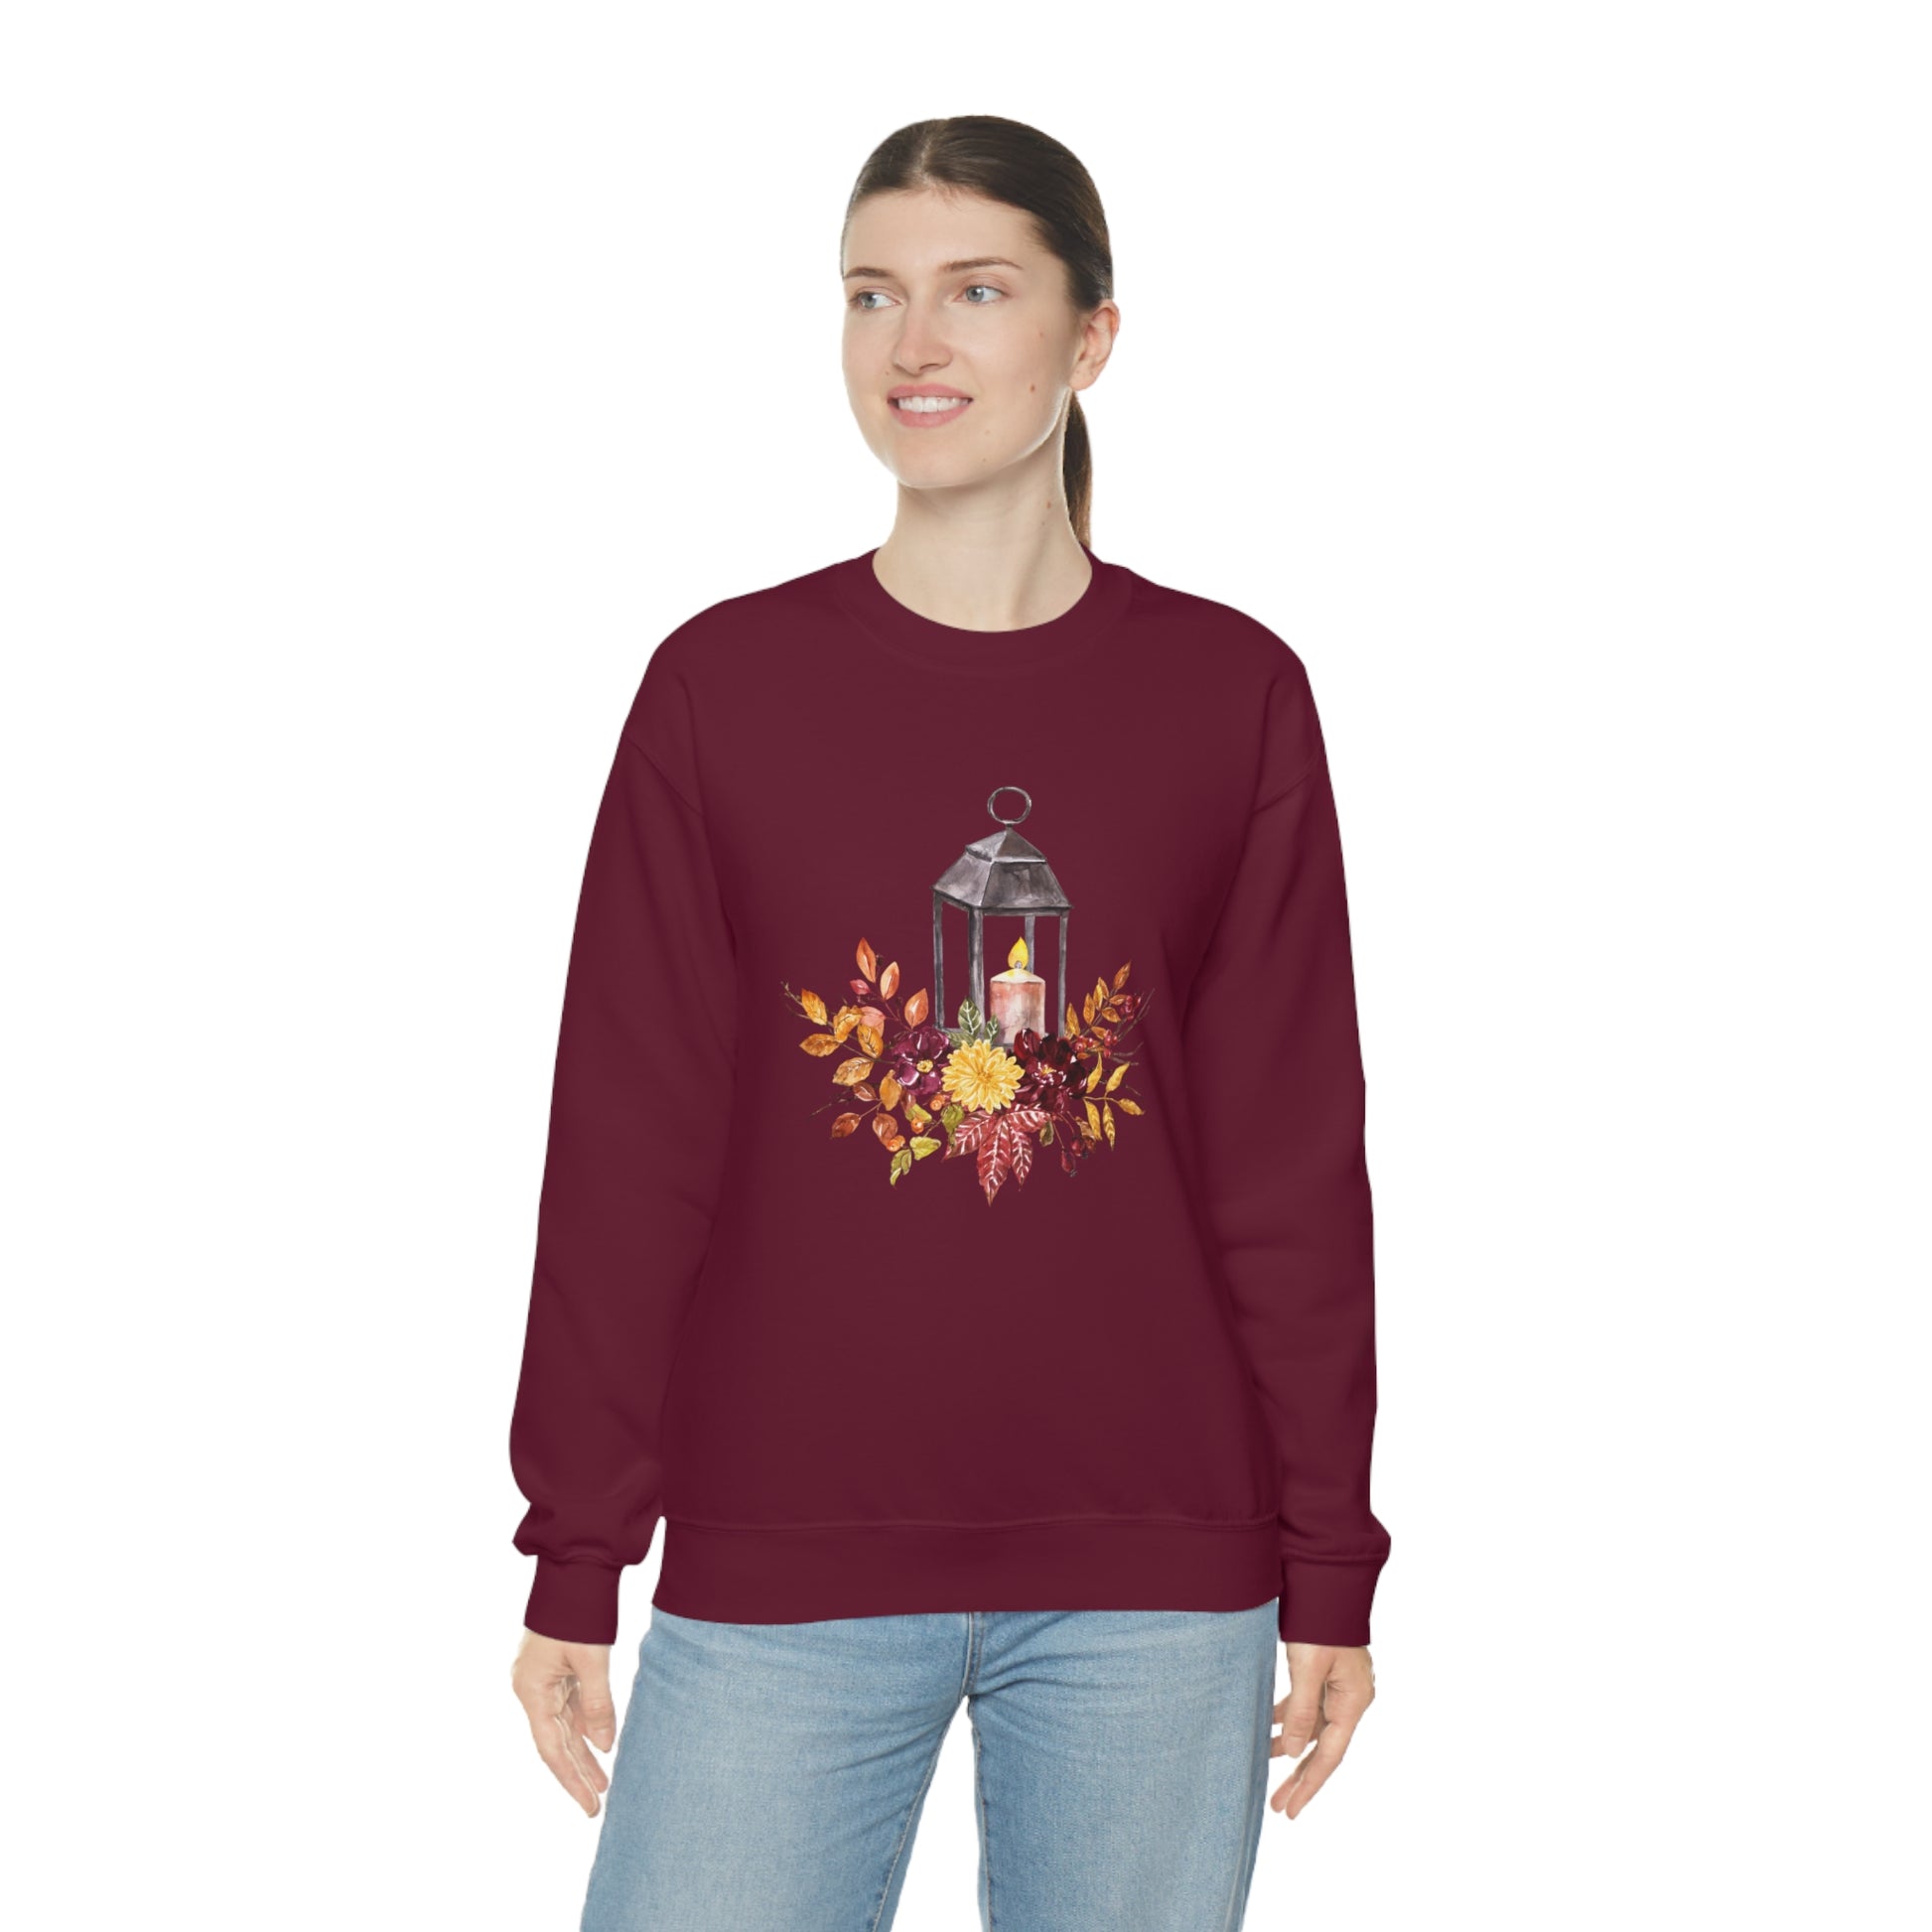 Mock up of a tall woman wearing the Maroon shirt